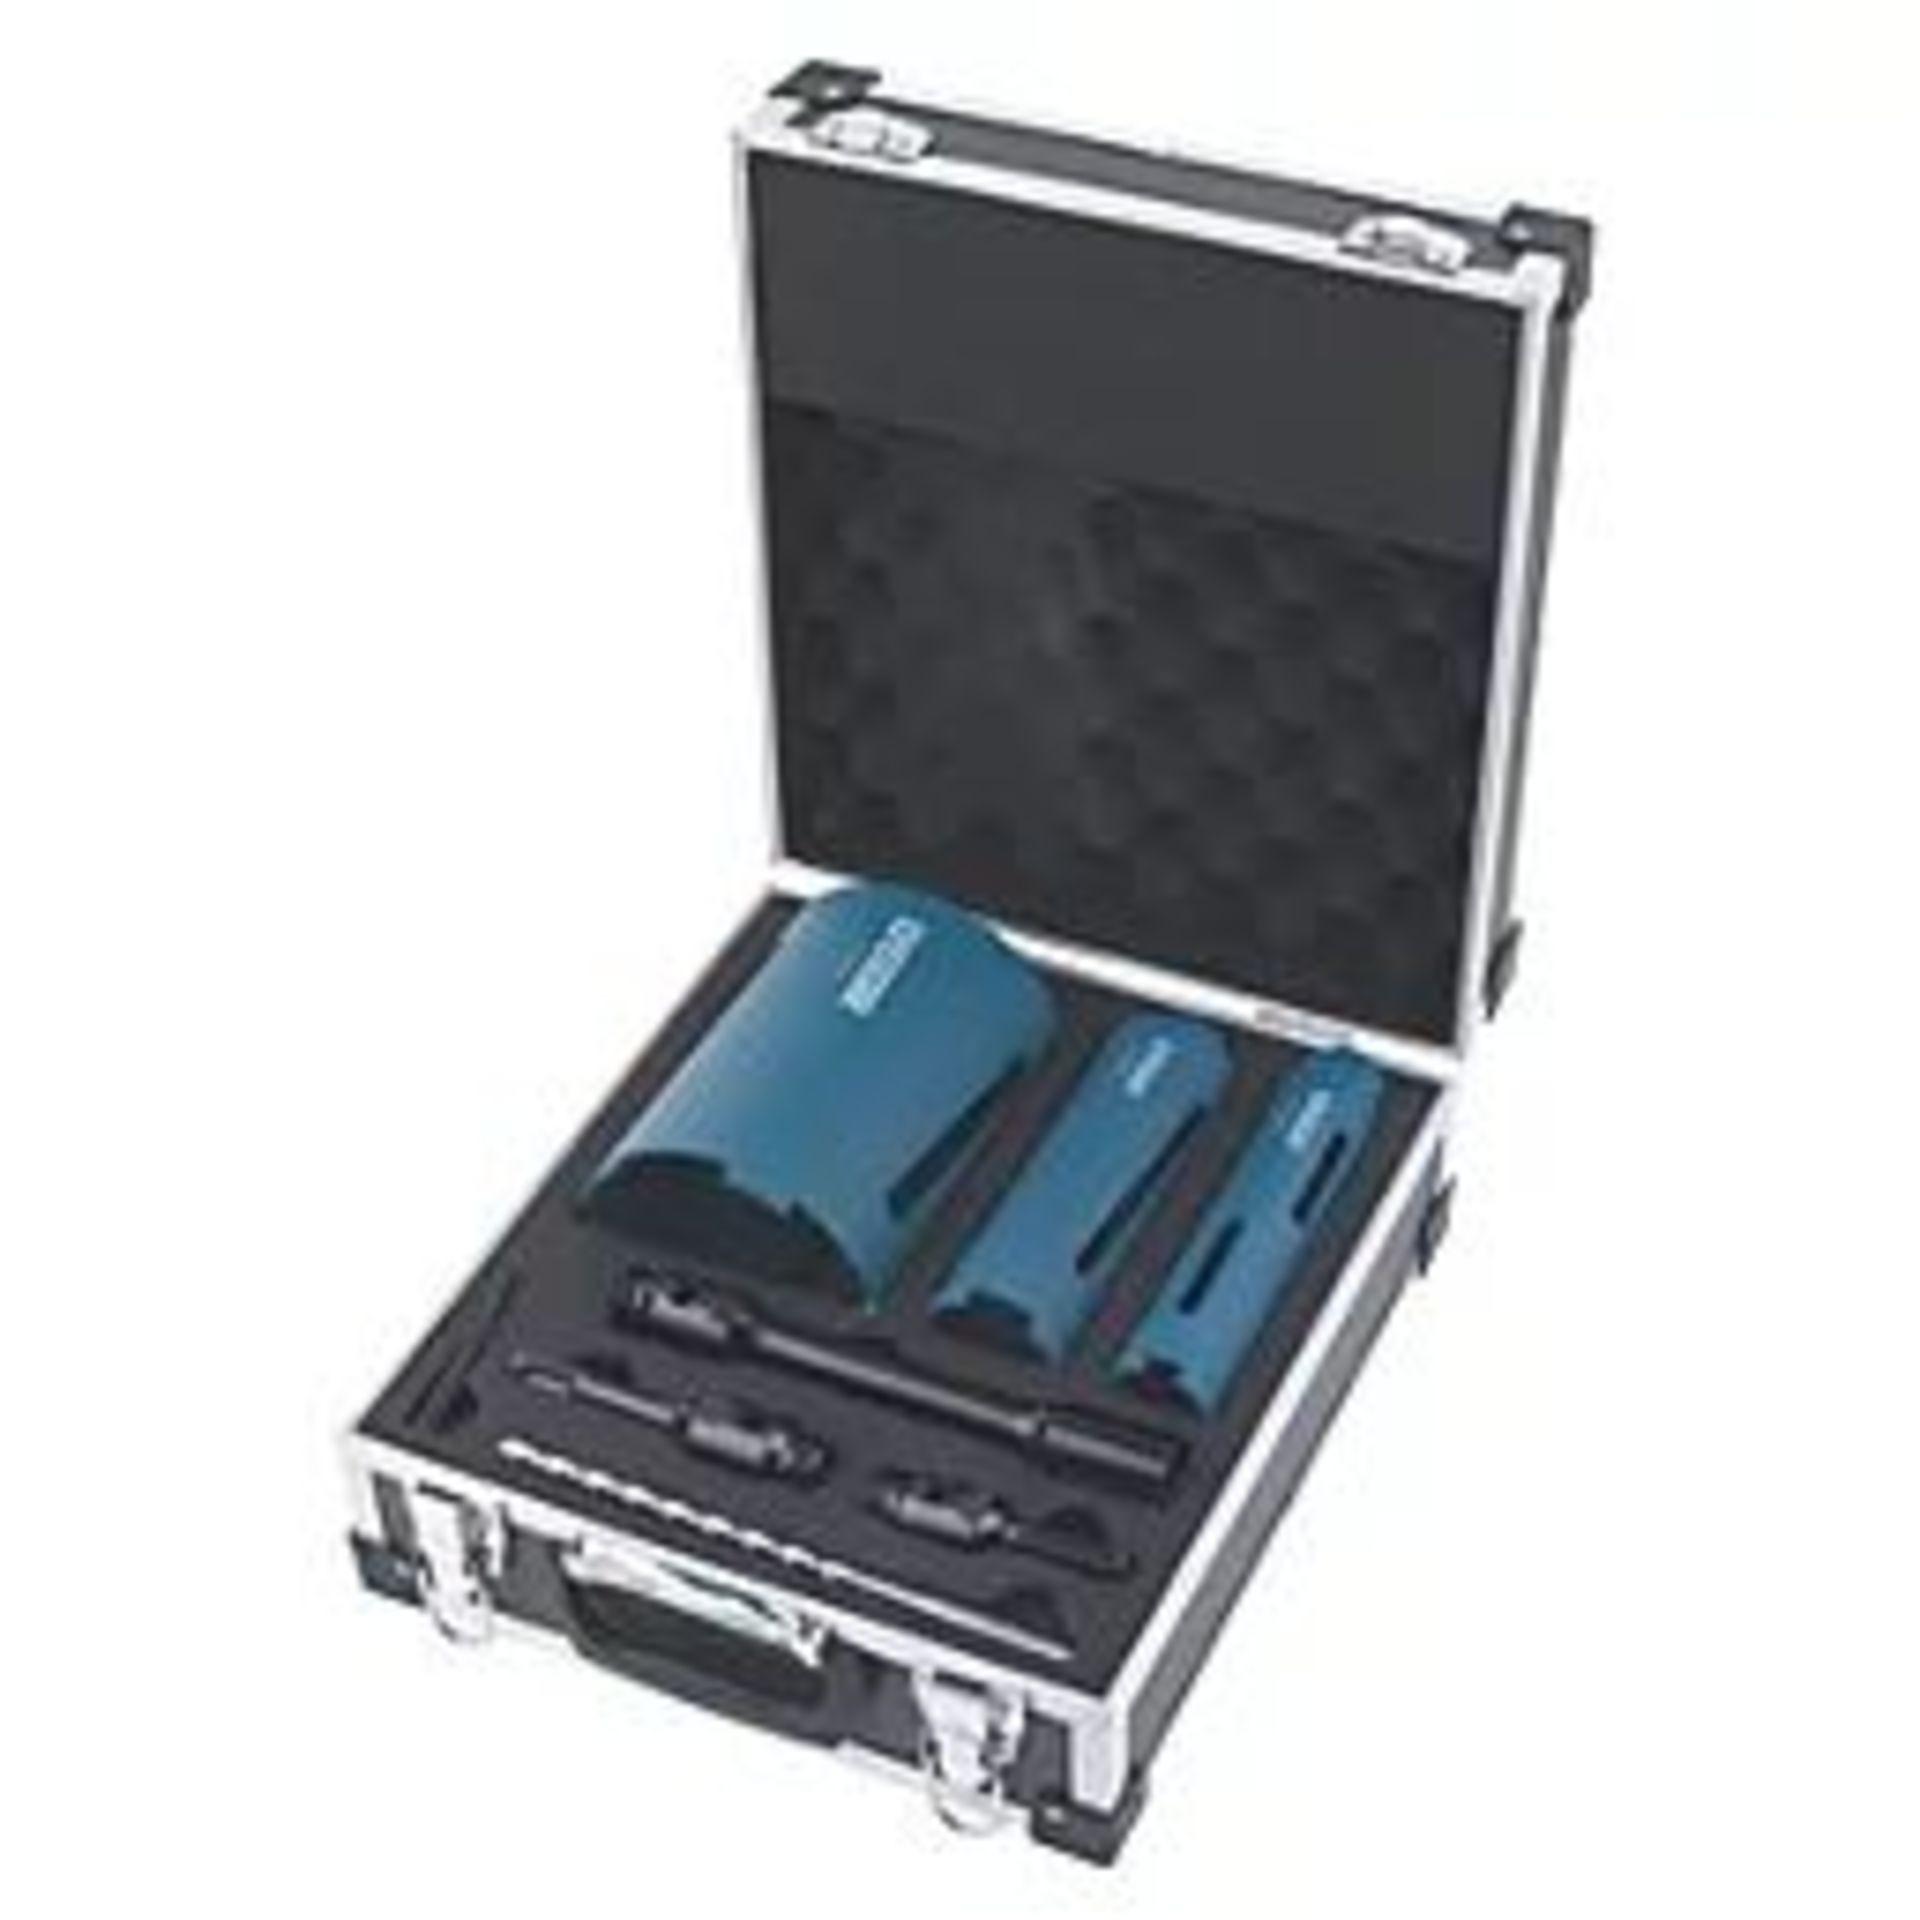 ERBAUER DIAMOND CORE DRILL KIT 3 CORES. - P4. A selection of 3 diamond core drills for fast, clean